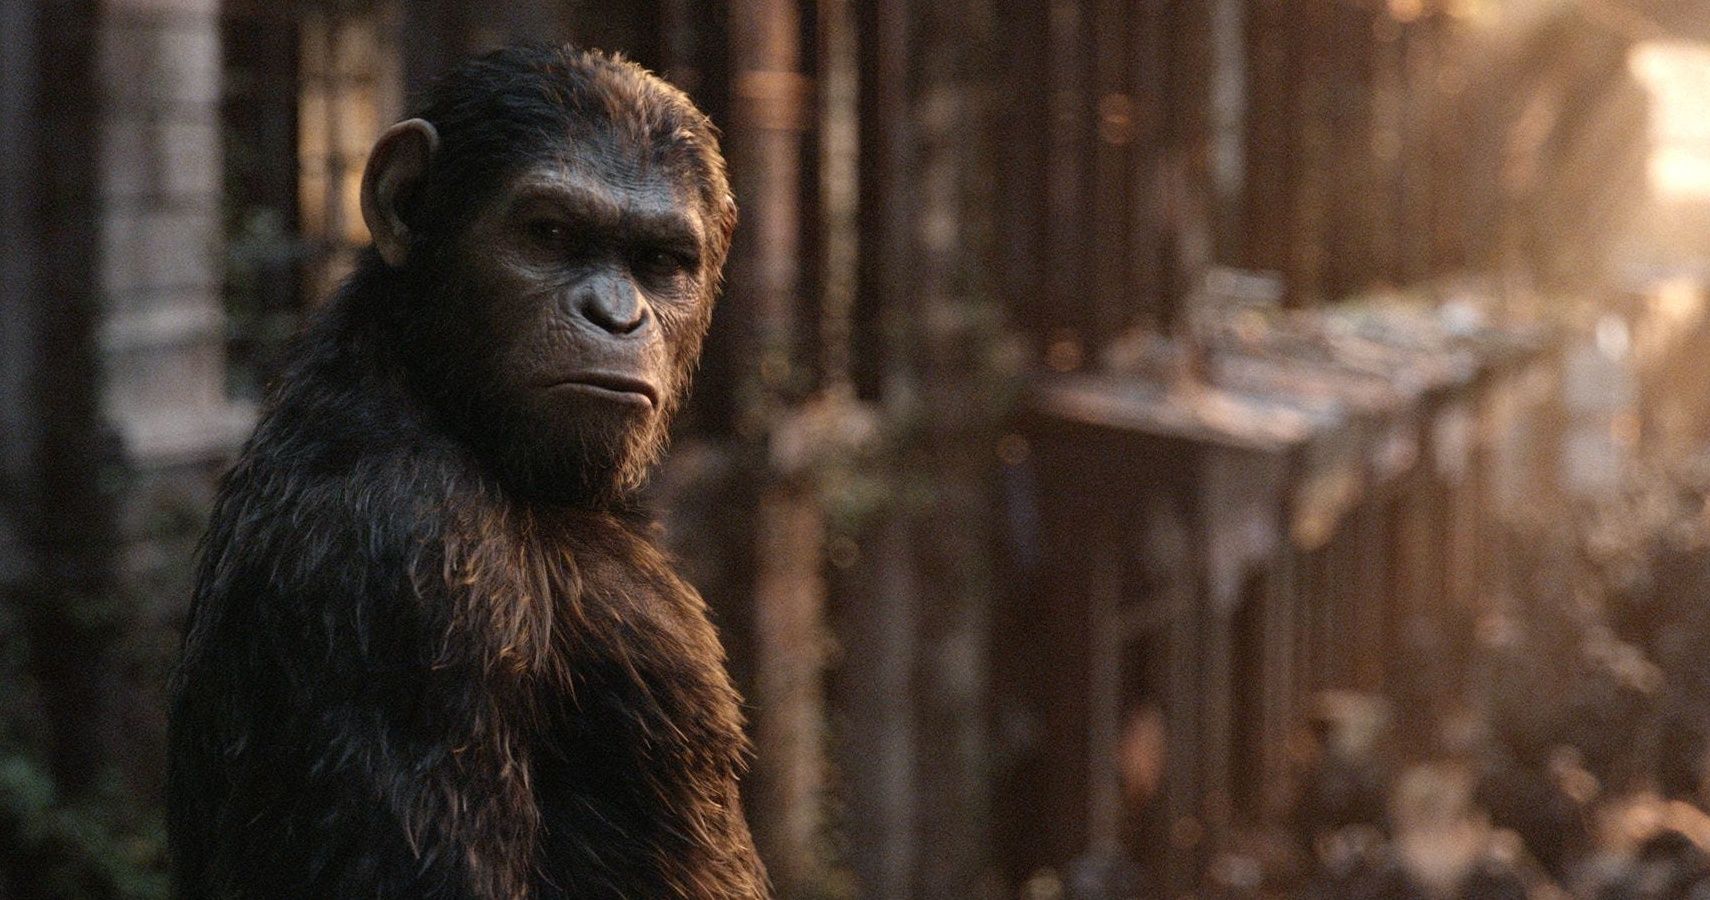 war for the planet of the apes full movie putlockers